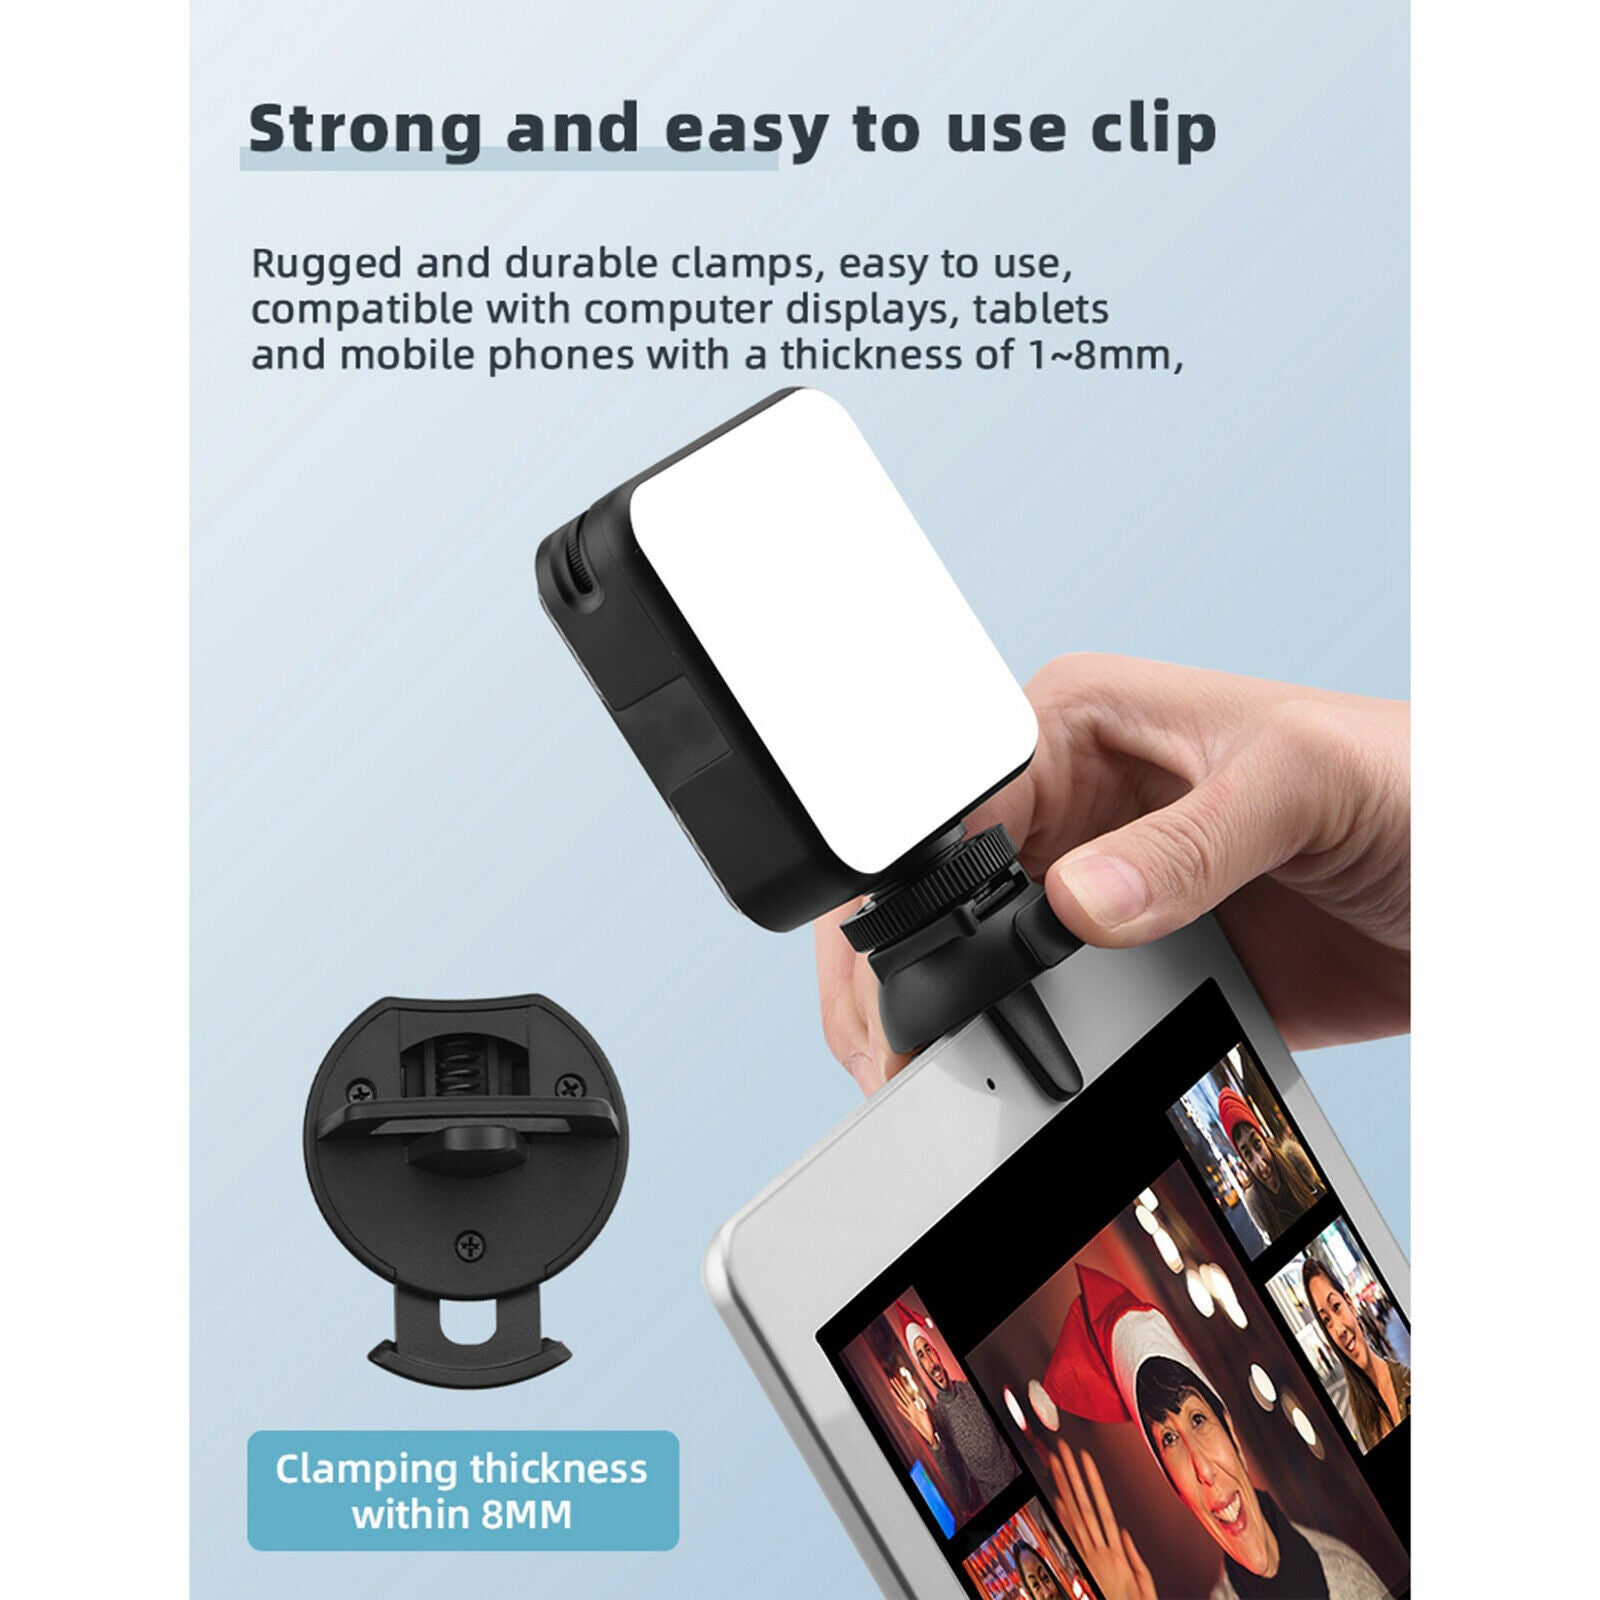 Video Conference Lighting Kit for Interview Remote Working Live Streaming